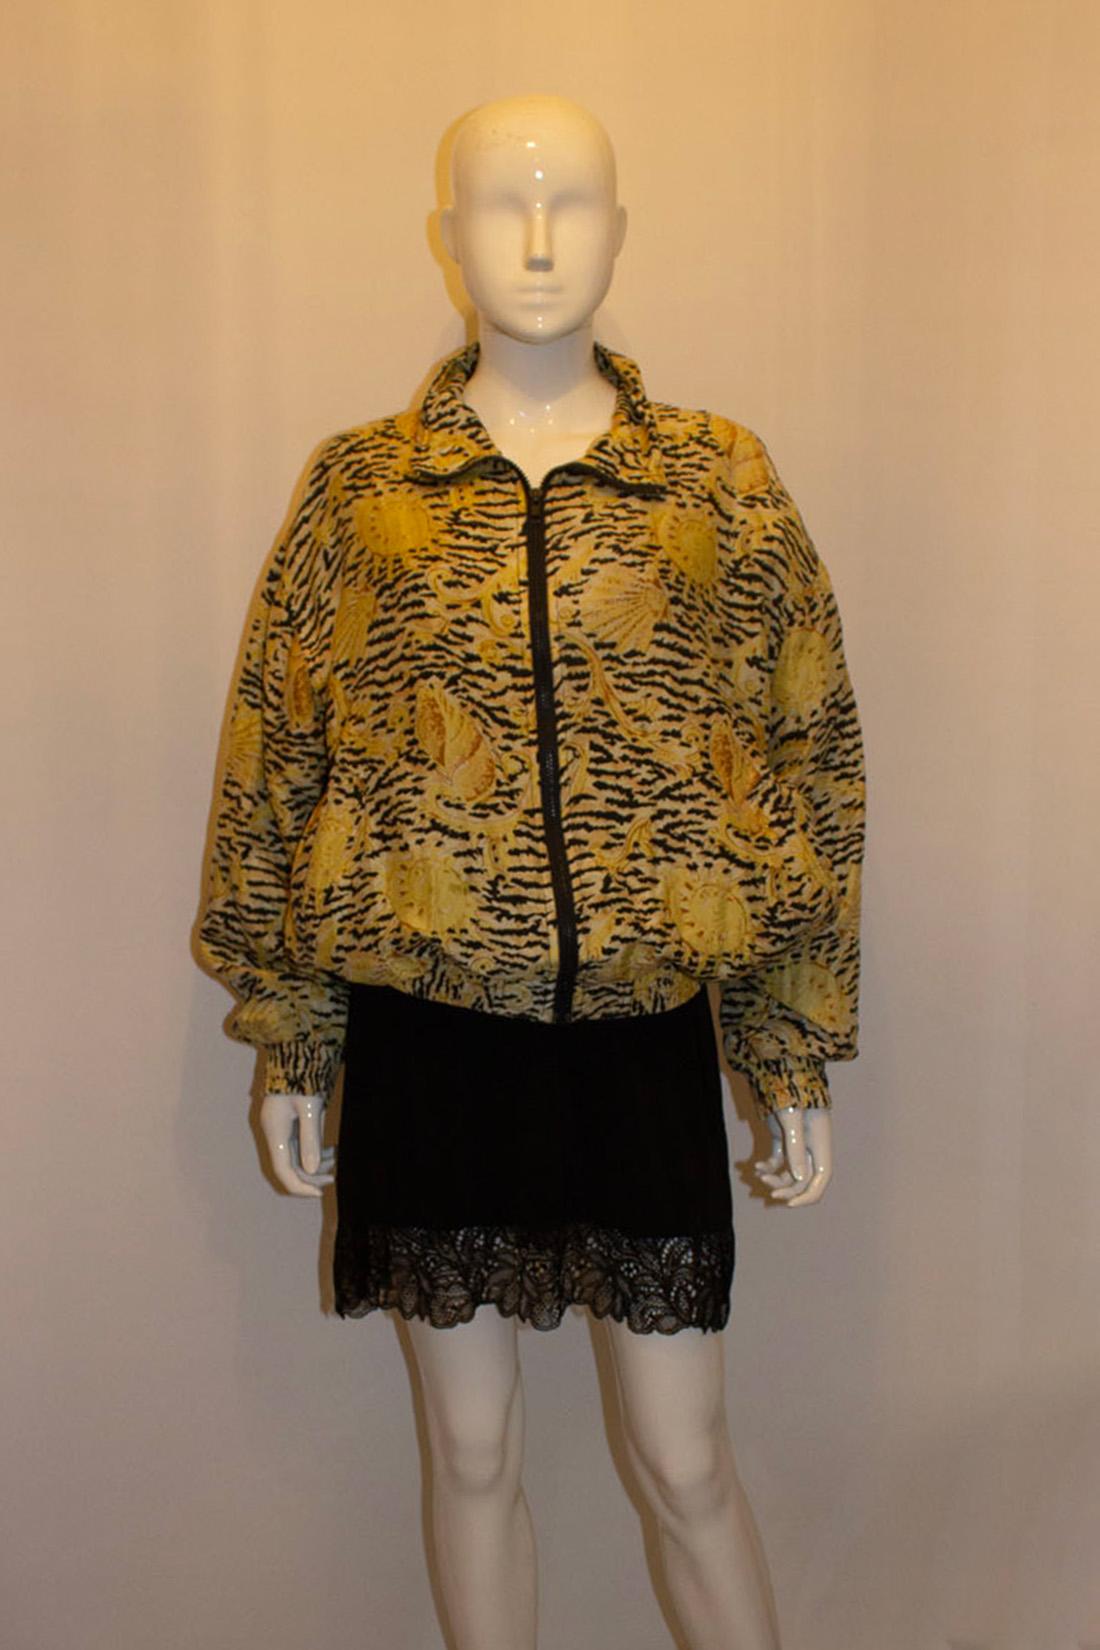 A fun jacket for Fall or late Summer. The jacket is in silk with a shell print design in yellow, caramel , black and ivory.  It has a central zip opening and a pocket on either side. The jacket has elasticated cuffs and hem, and is fully